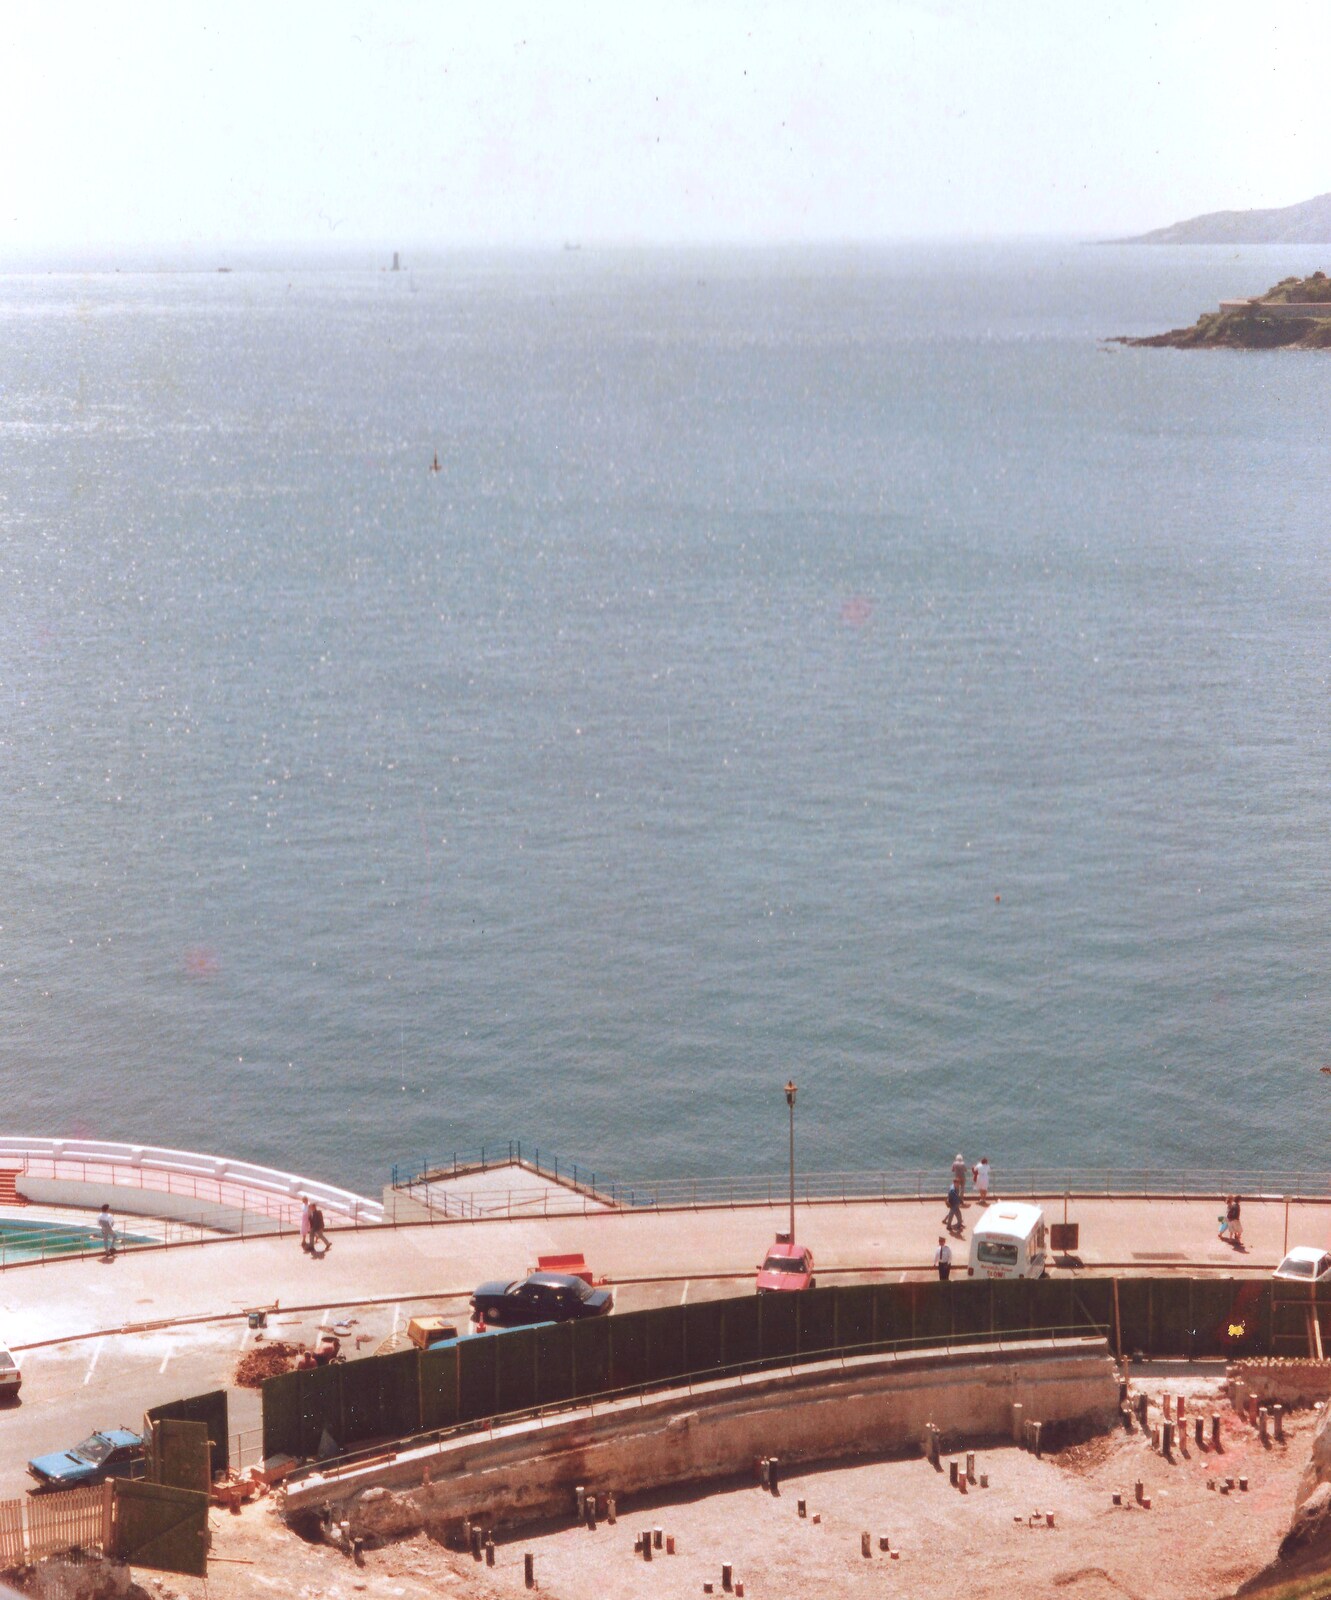 Plymouth Sound and the foundations of Plymouth Dome from Aerial Scenes of Plymouth, Devon - 28th June 1987